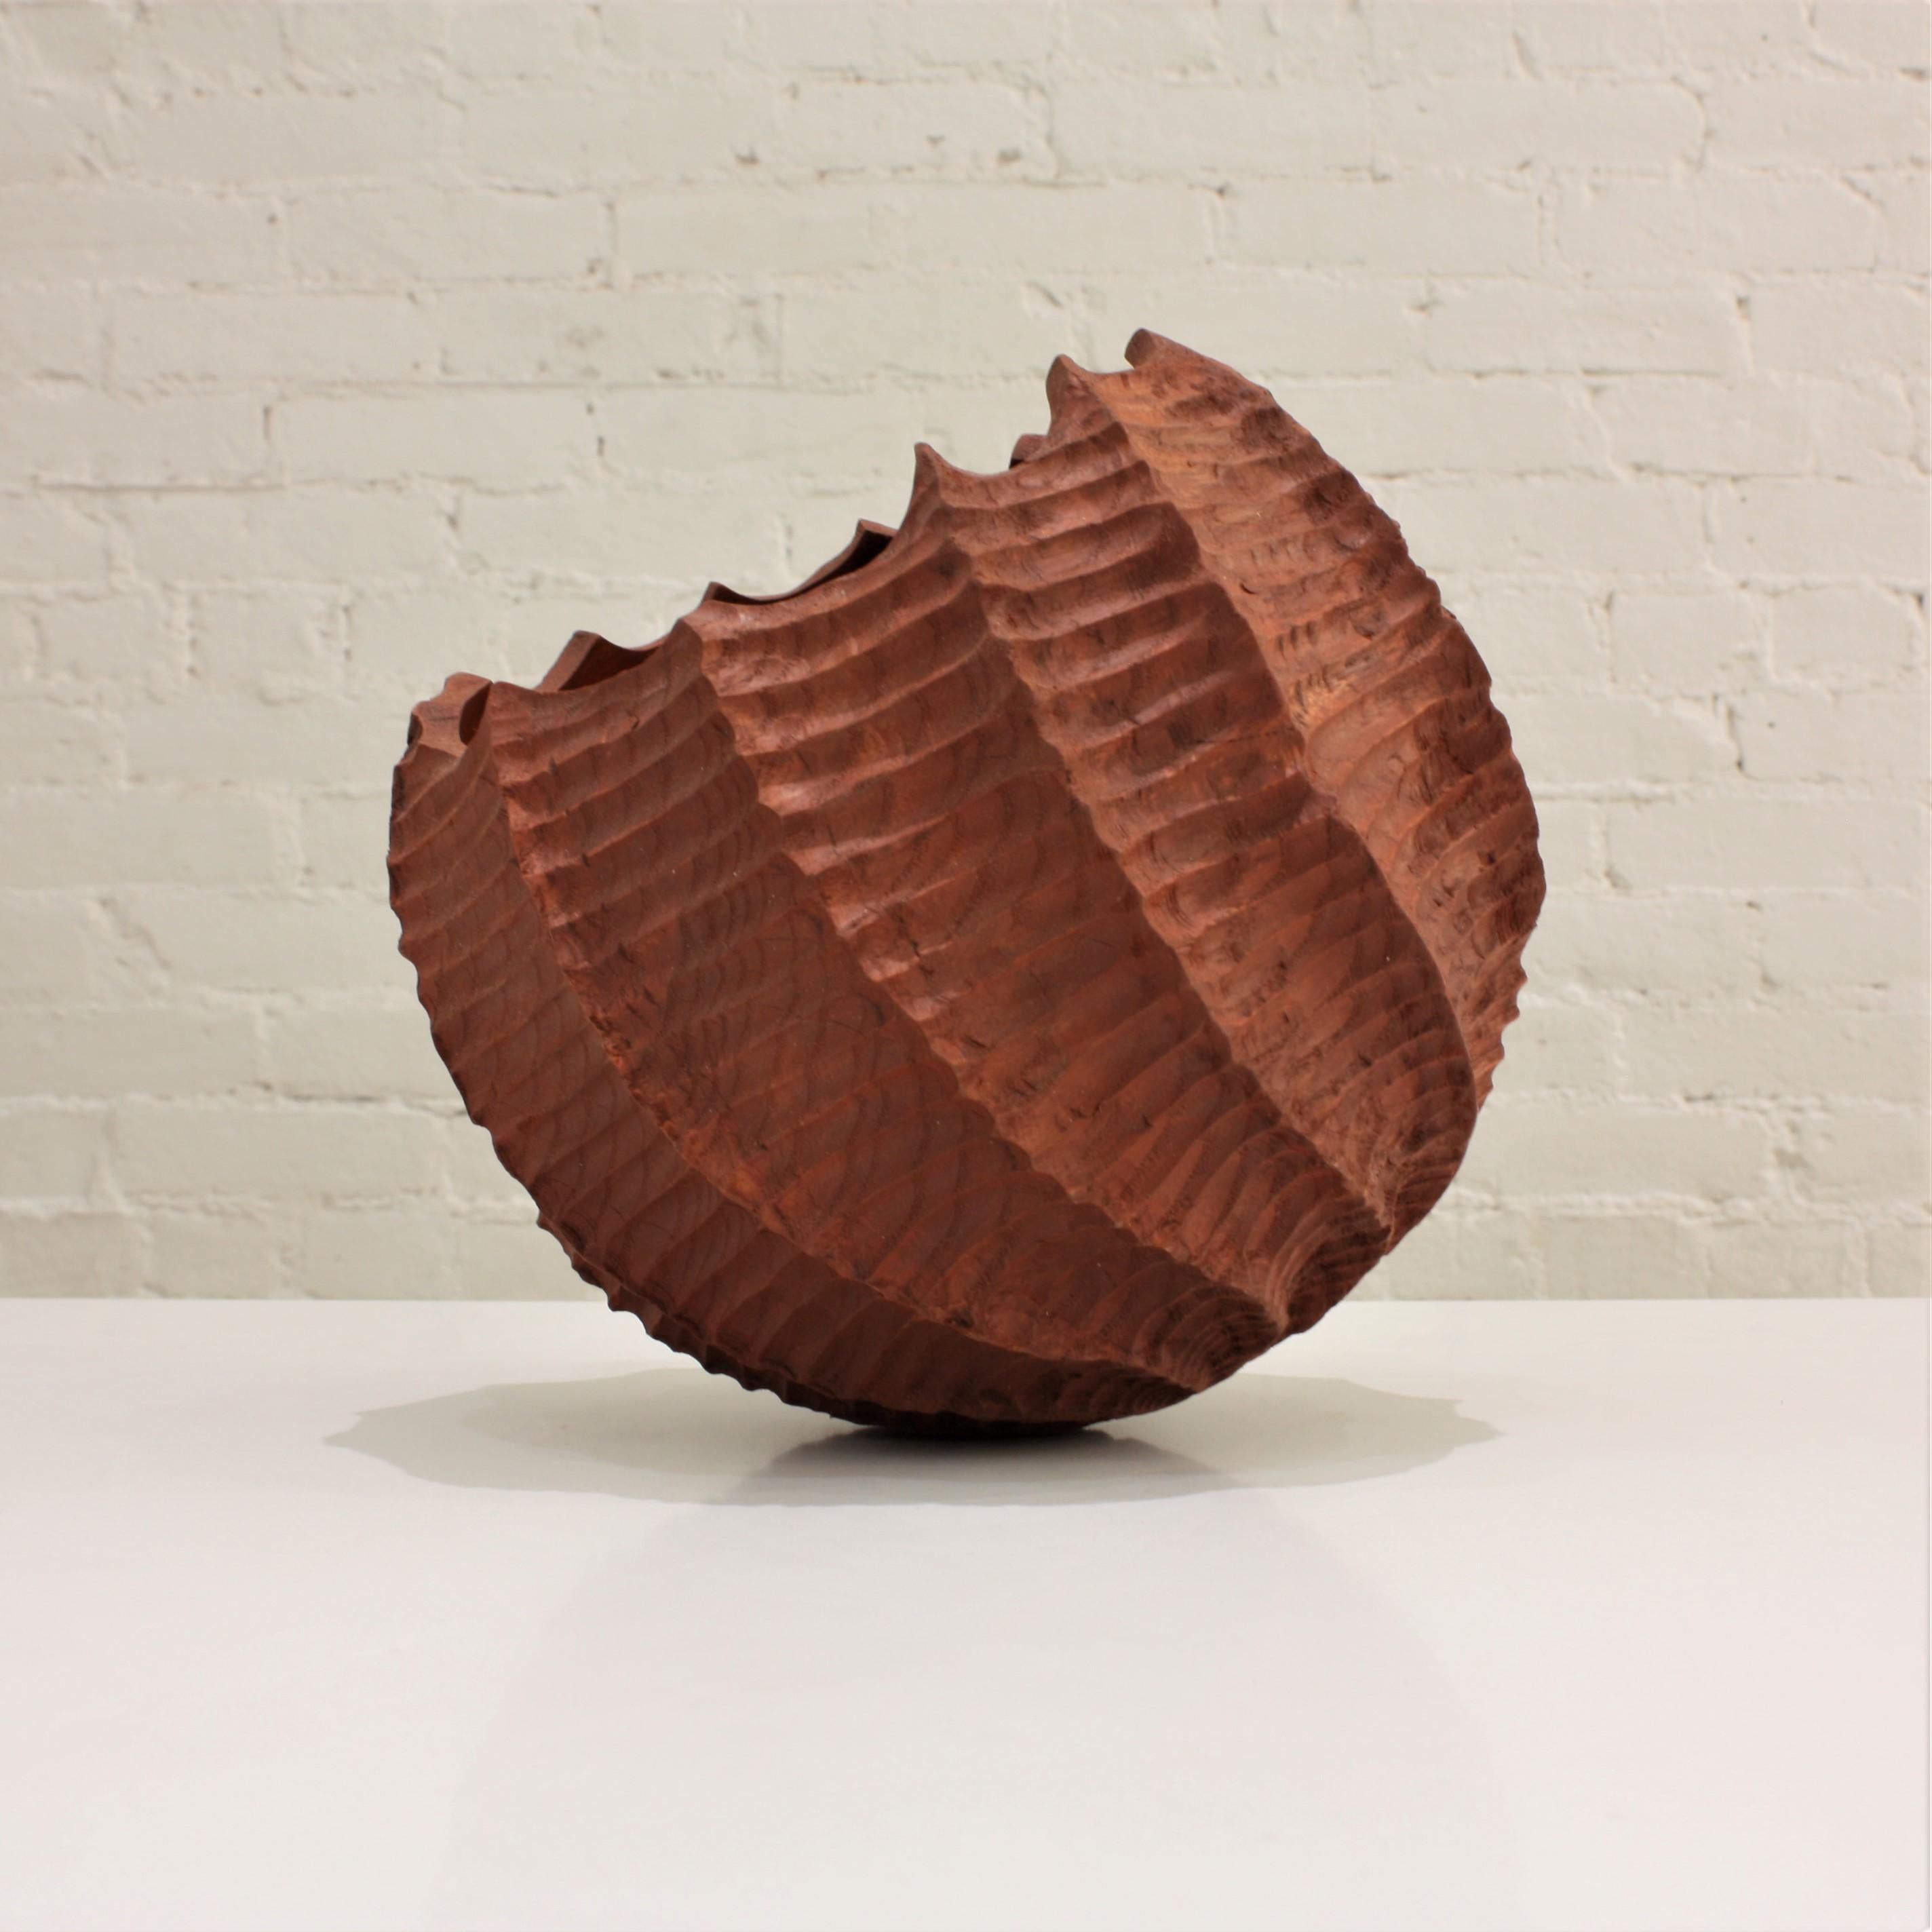 ashwood sculpture by artist Maxime Perrolle in warm cinnamon tones. The combination of textures is particularly strking, with its smooth interior and rugged outer surface, and extendes an invitation to touch. This piece was created out of a single